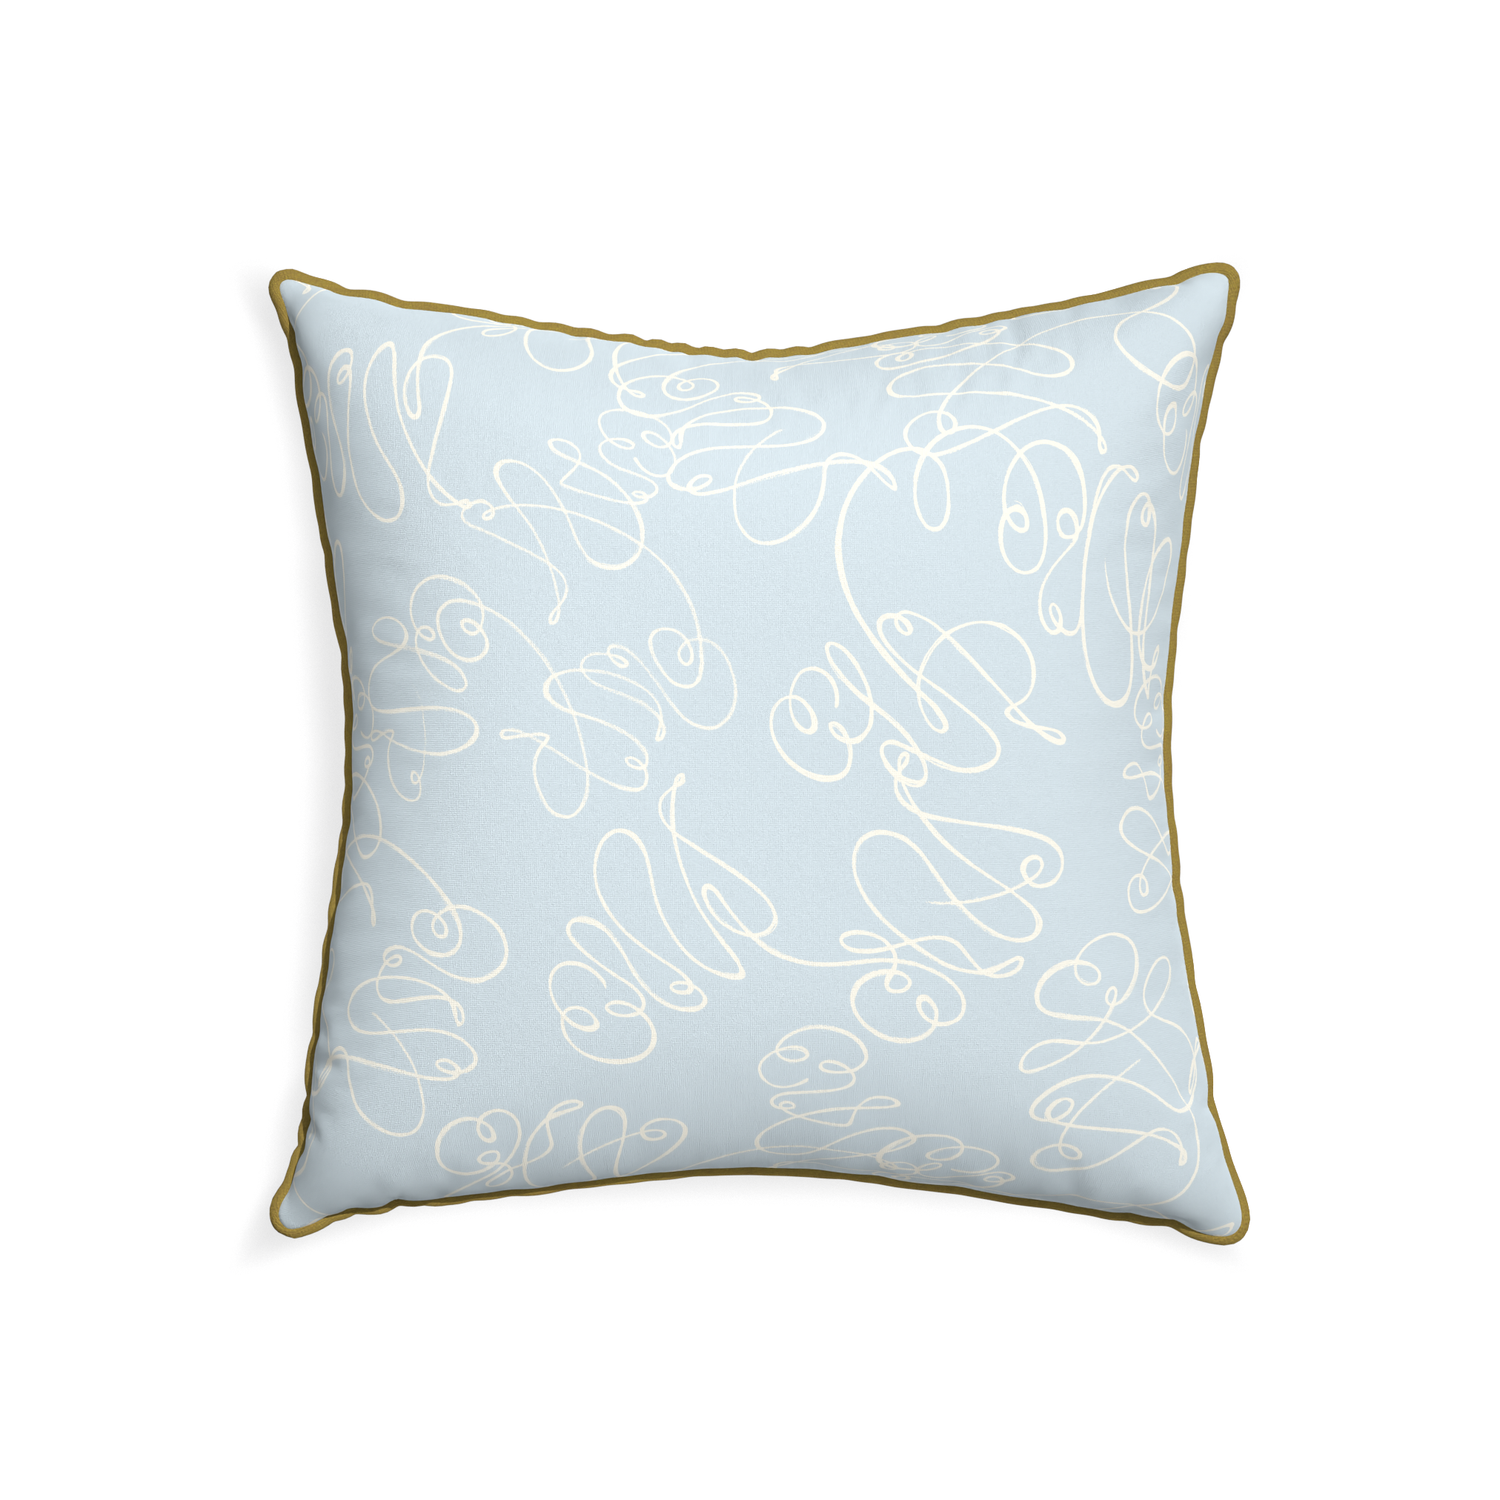 22-square mirabella custom powder blue abstractpillow with c piping on white background